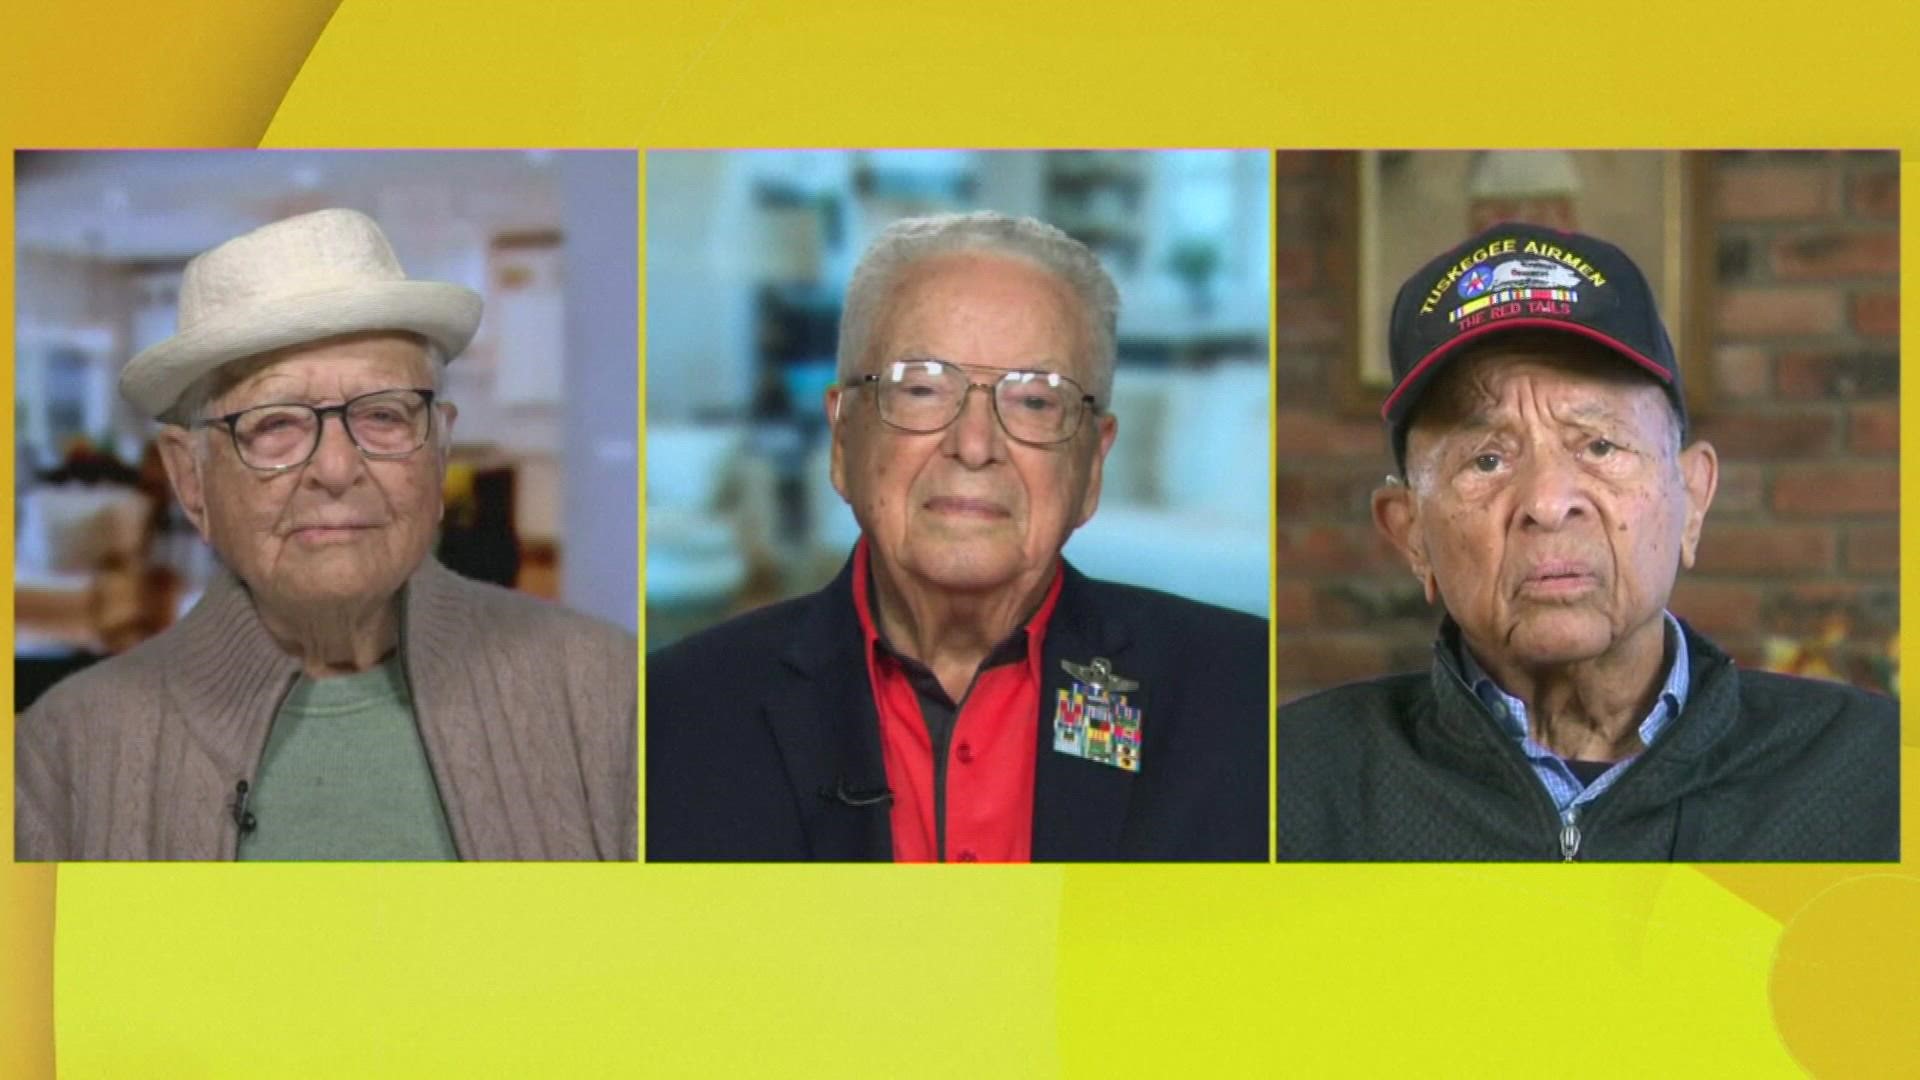 Television icon and veteran Norman Lear vividly remembers the protection the Tuskegee Airmen provided during combat missions.